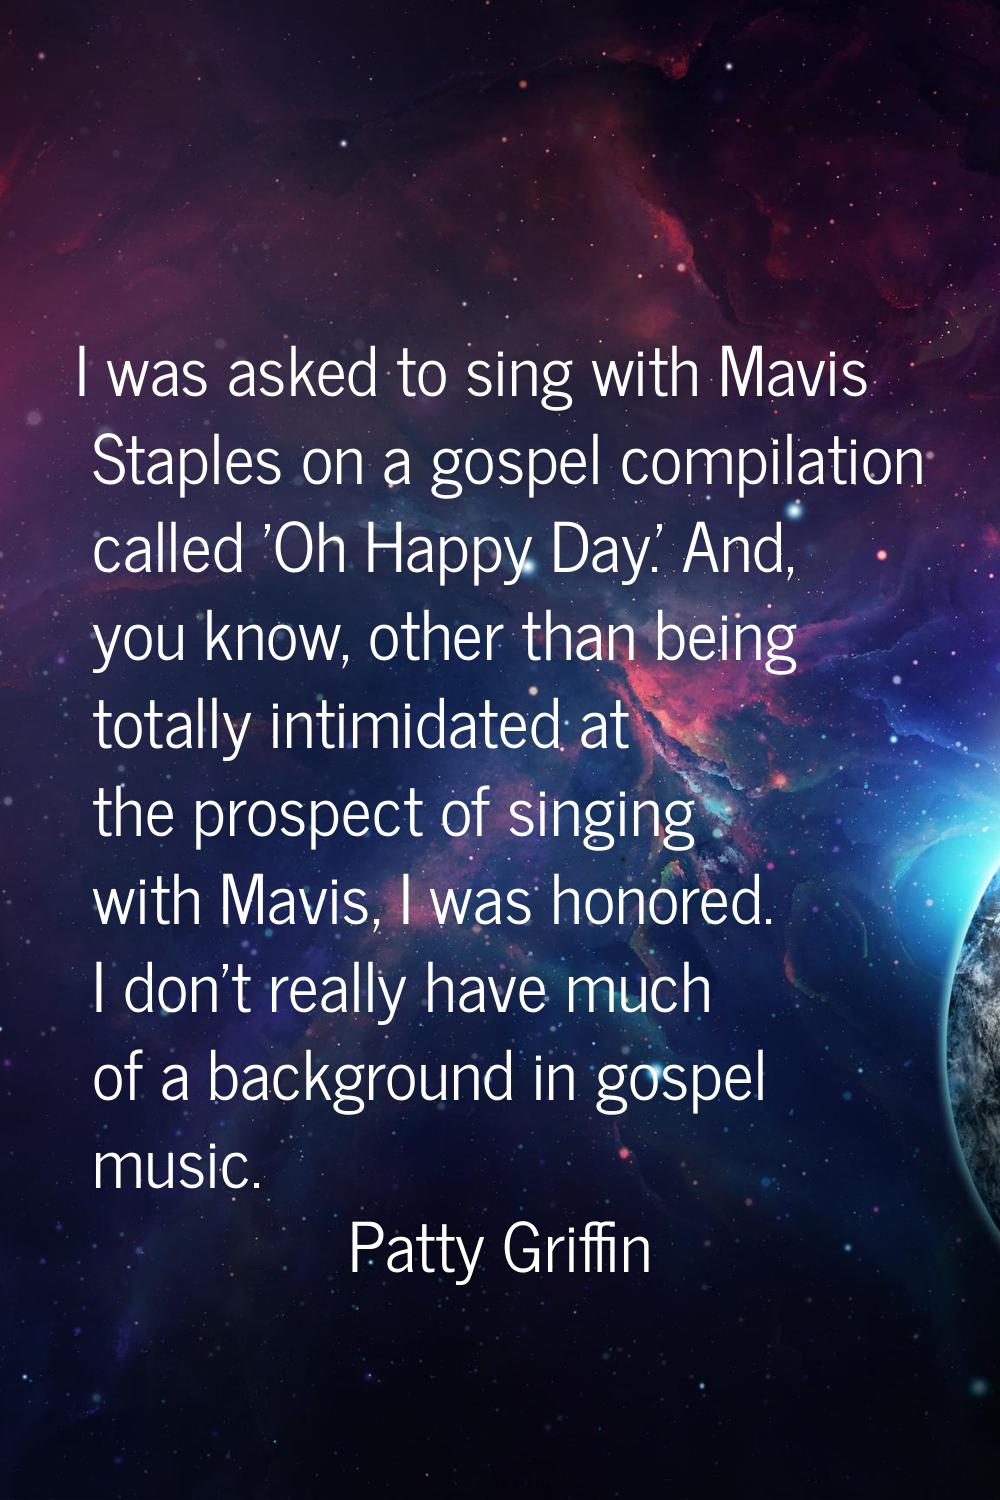 I was asked to sing with Mavis Staples on a gospel compilation called 'Oh Happy Day.' And, you know